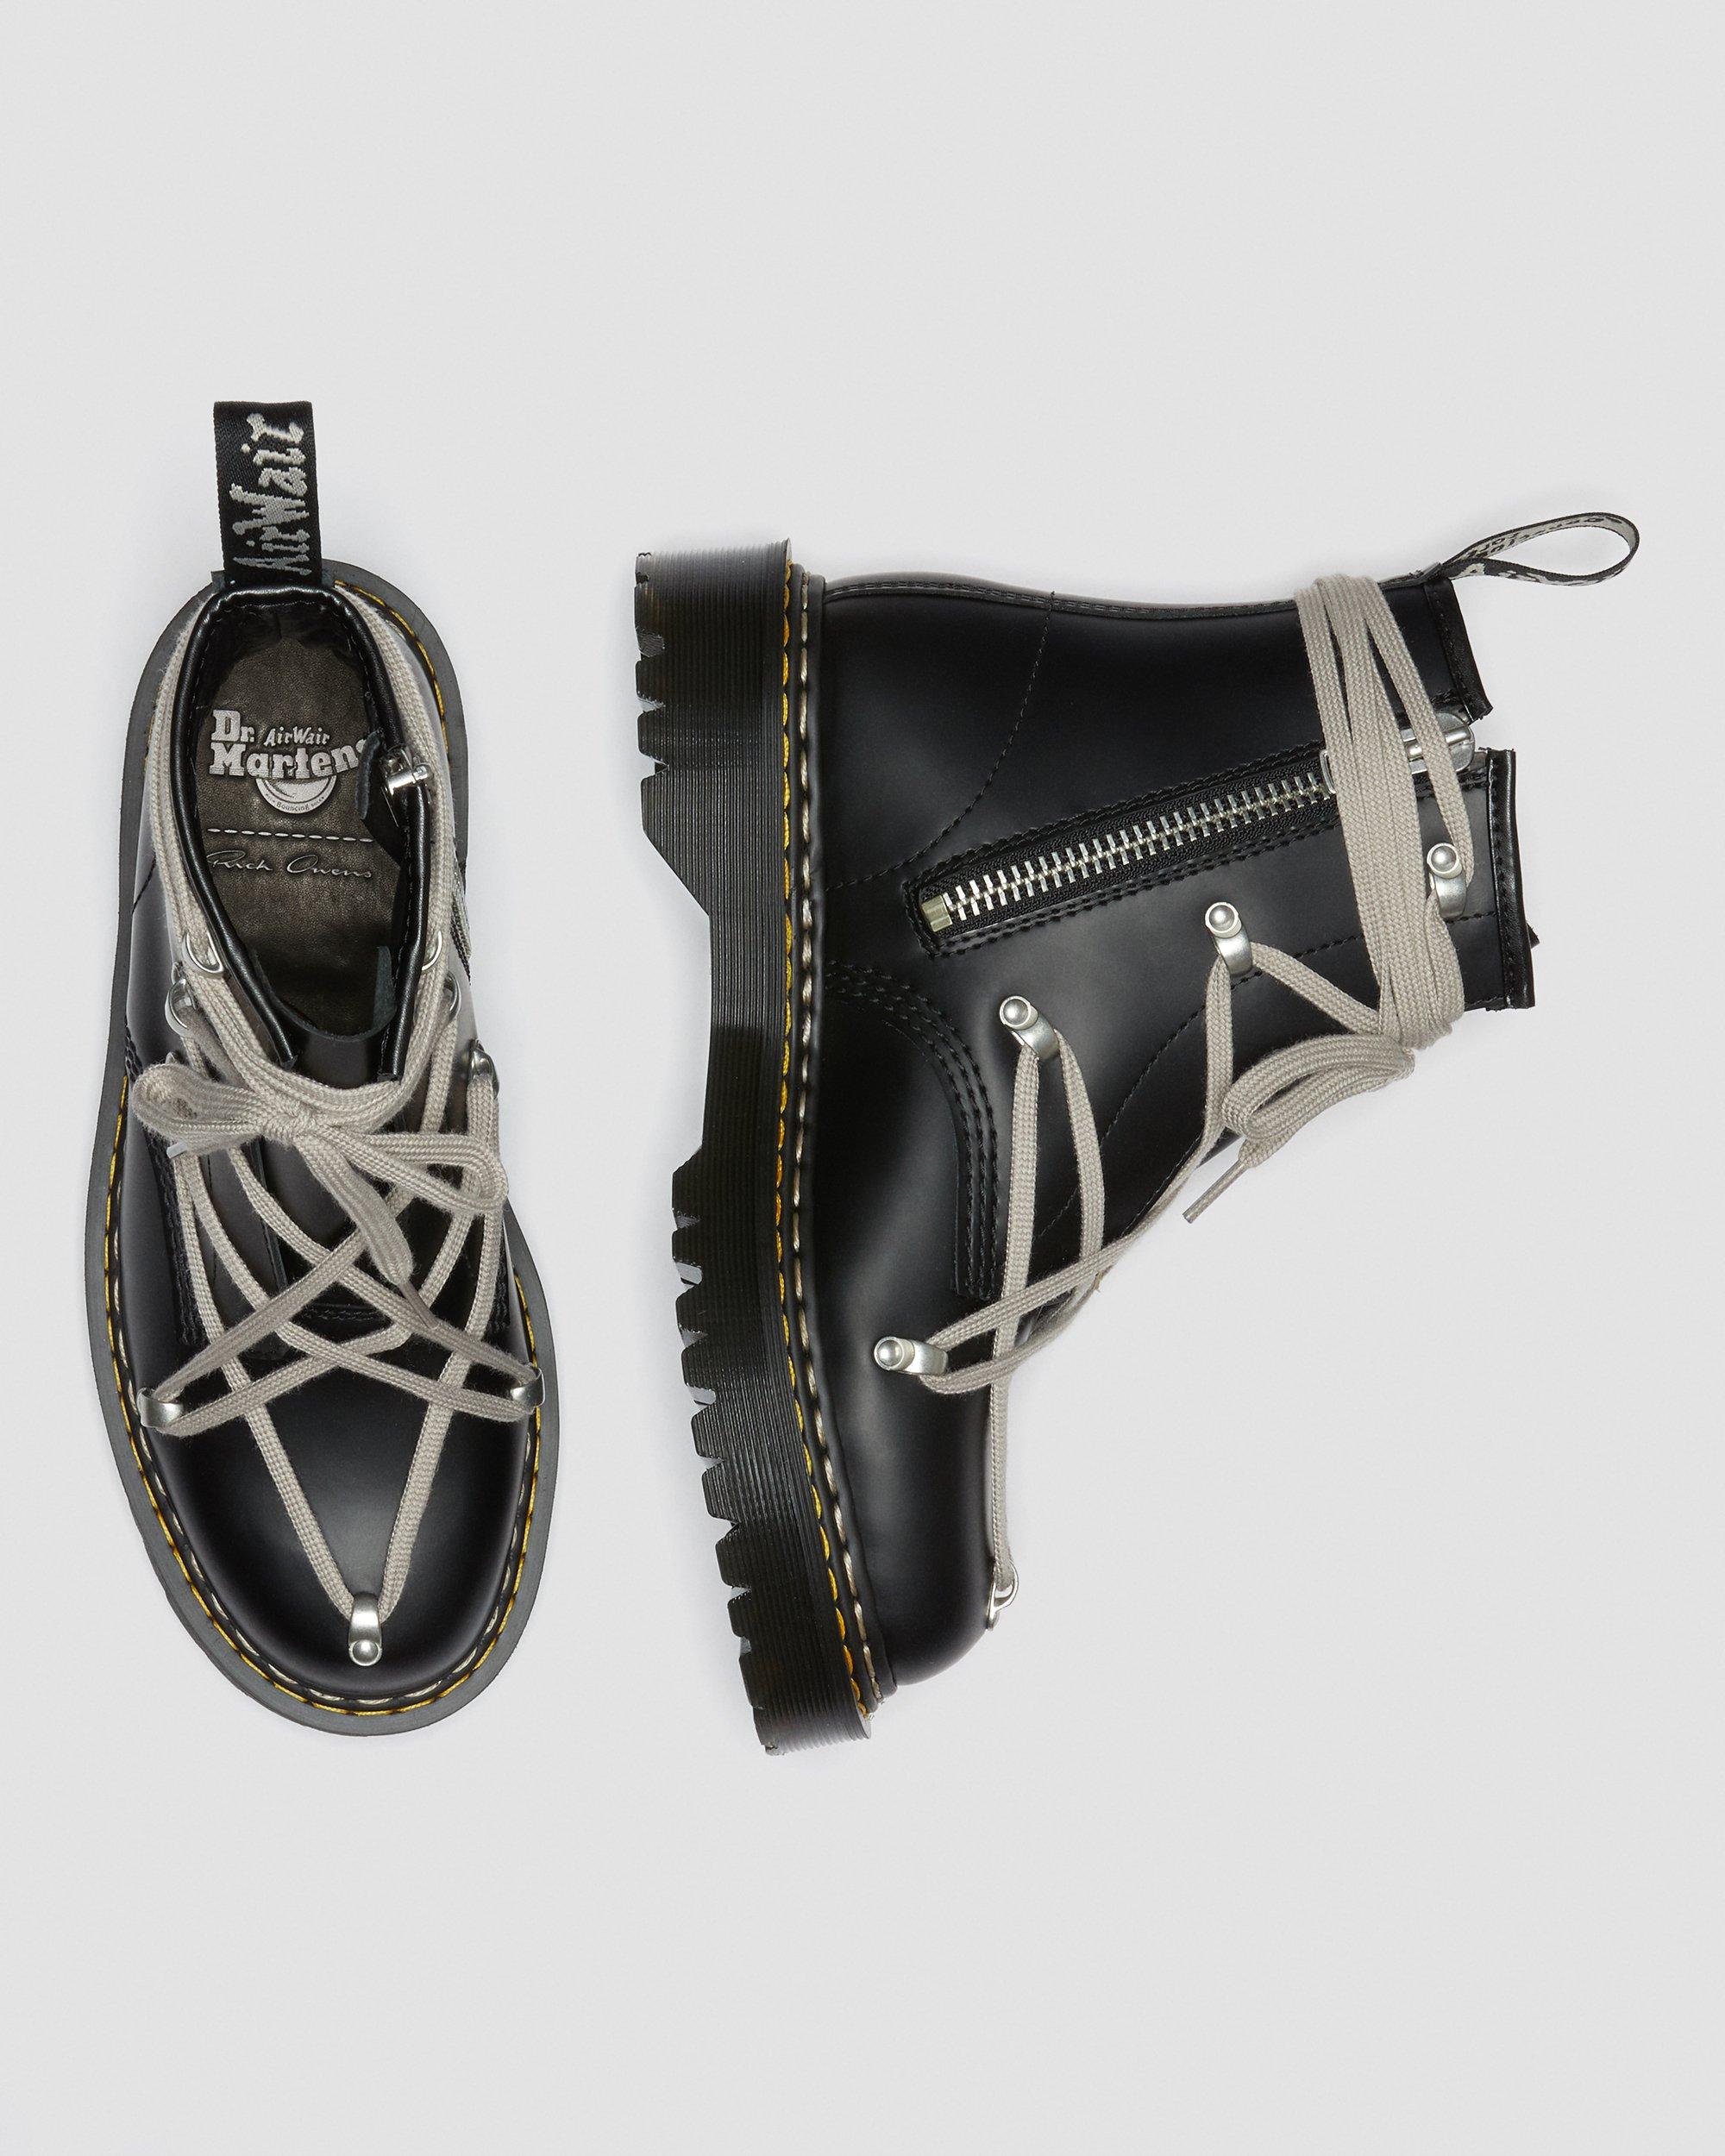 Rick Owens 1460 Bex Leather Lace Up Boots in Black | Dr. Martens